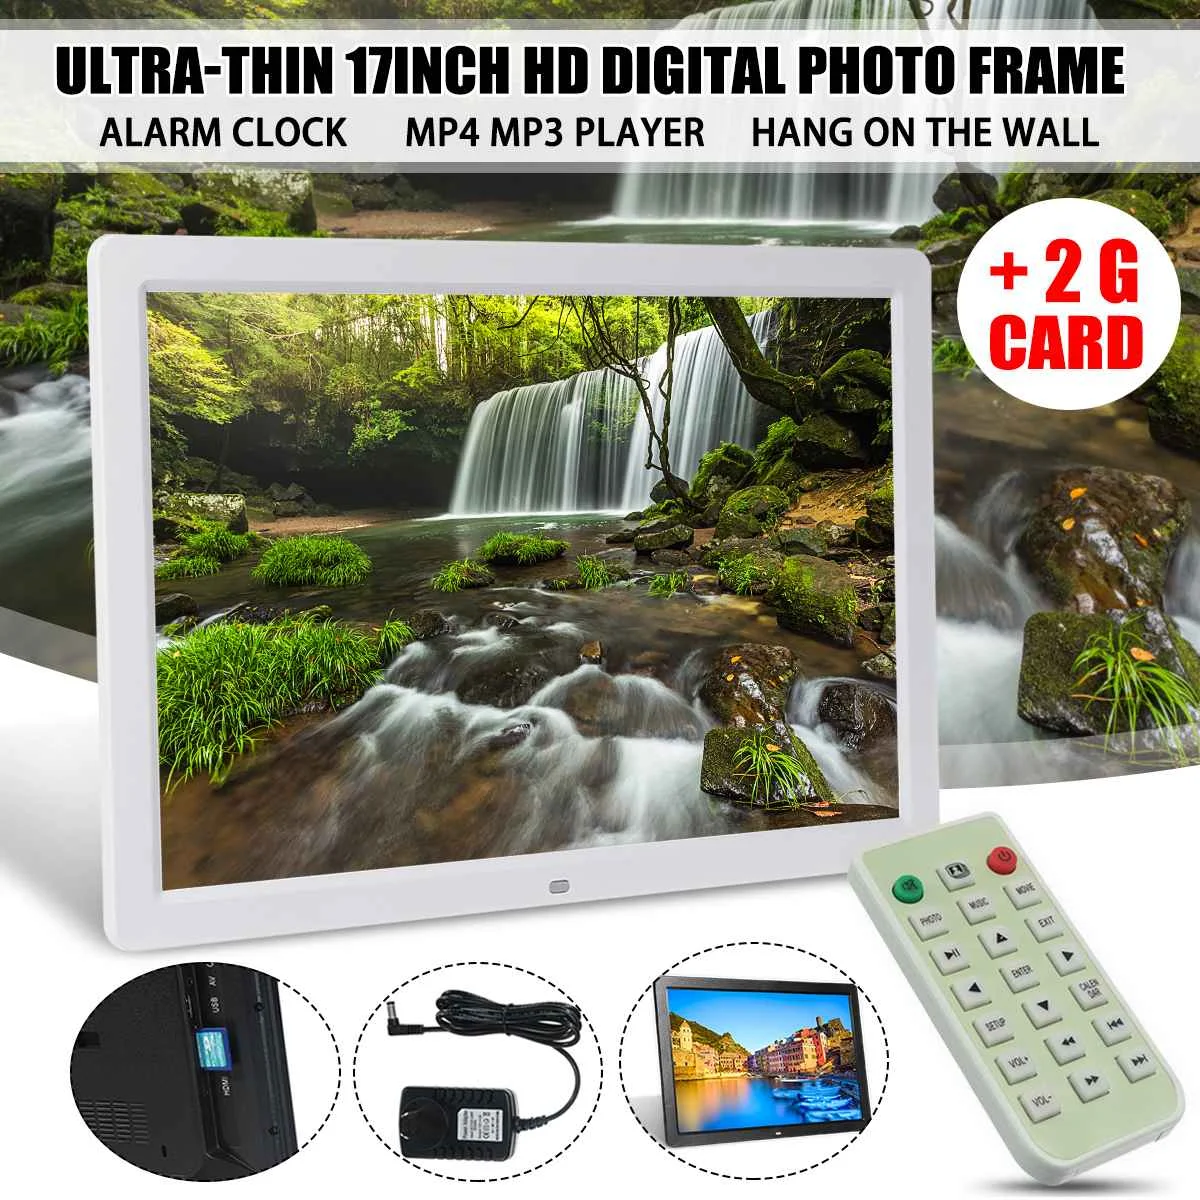 17 inch HD Digital Photo Frame Gallery Advertising Machine with Remote Control 1440*900 LED Screen Electronic Picture Album - Цвет: 17Inch with 2G Card